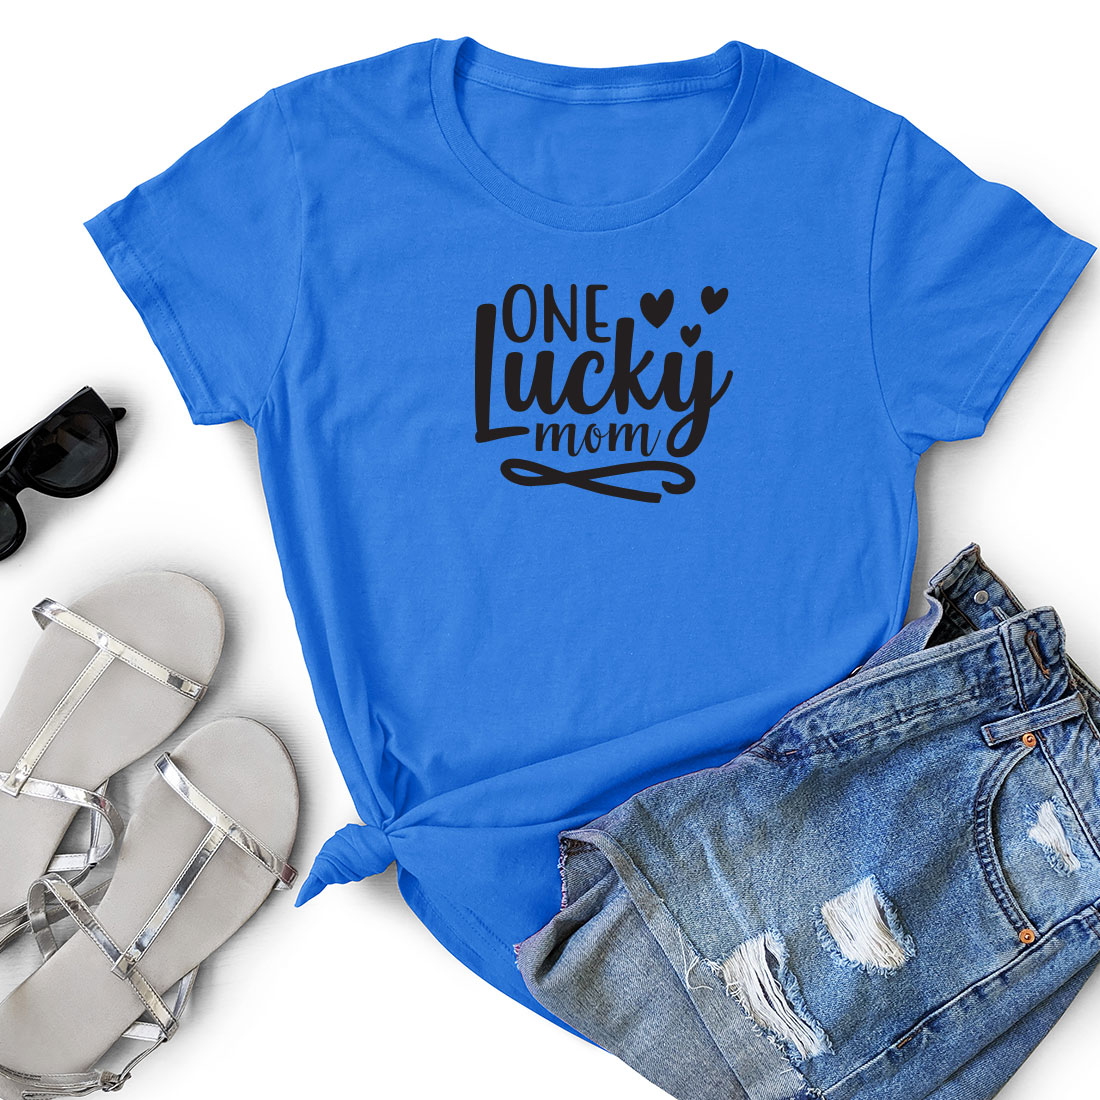 T - shirt that says one lucky mom next to a pair of shorts.